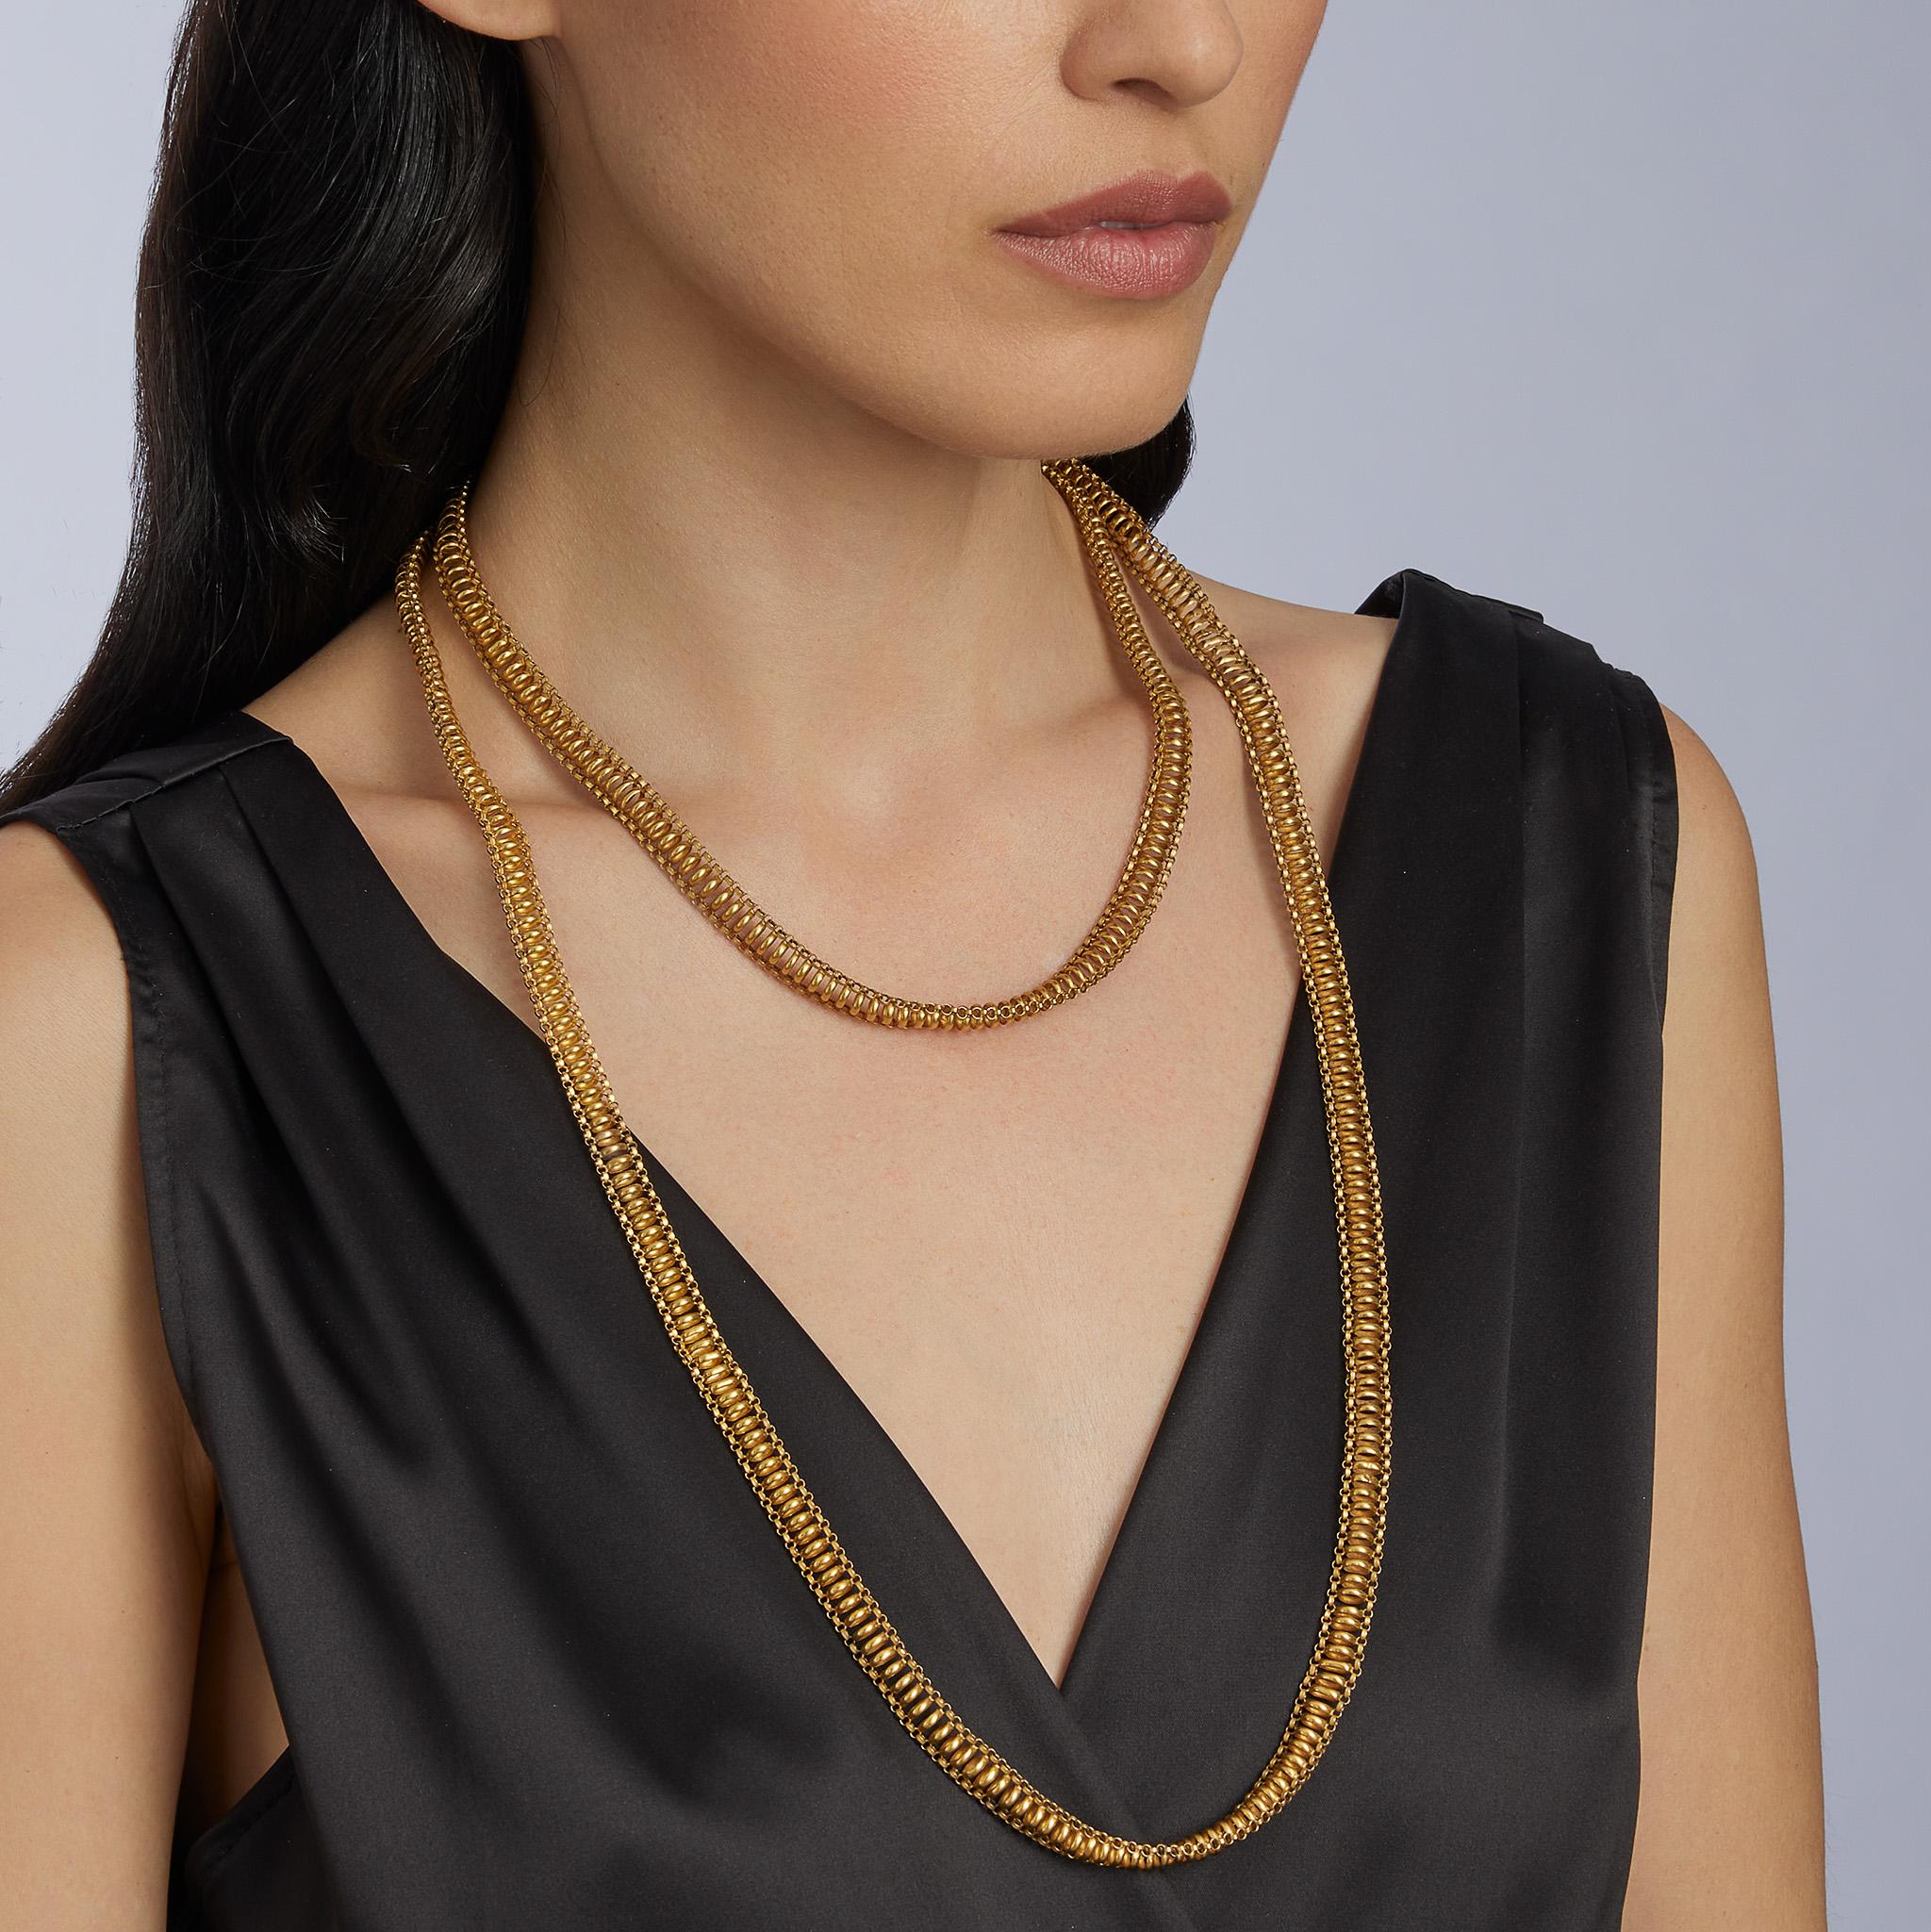 Made around the end of the Georgian period in 1830, this long chain necklace is formed of 18K gold. Of endless form, it is composed of oval polished links edged by ribbed trace link chain. Voluminous, yet soft and light, with a subtle contrast of